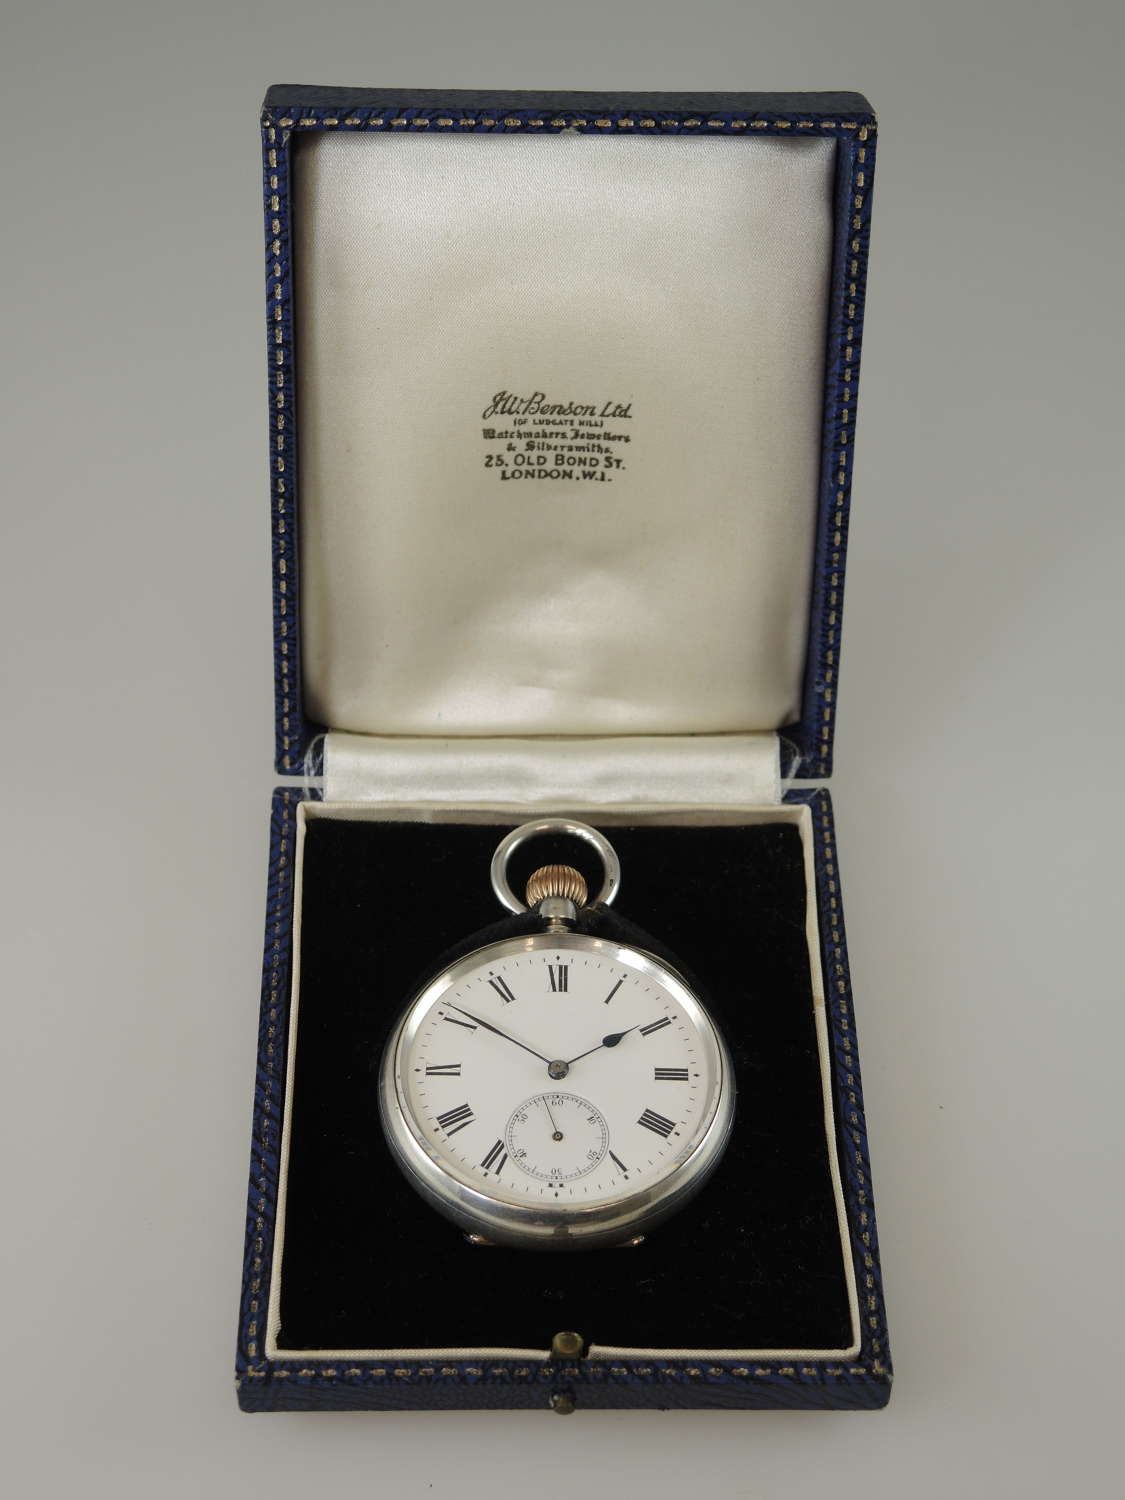 Antique silver pocket watch by J W Benson with box c1910